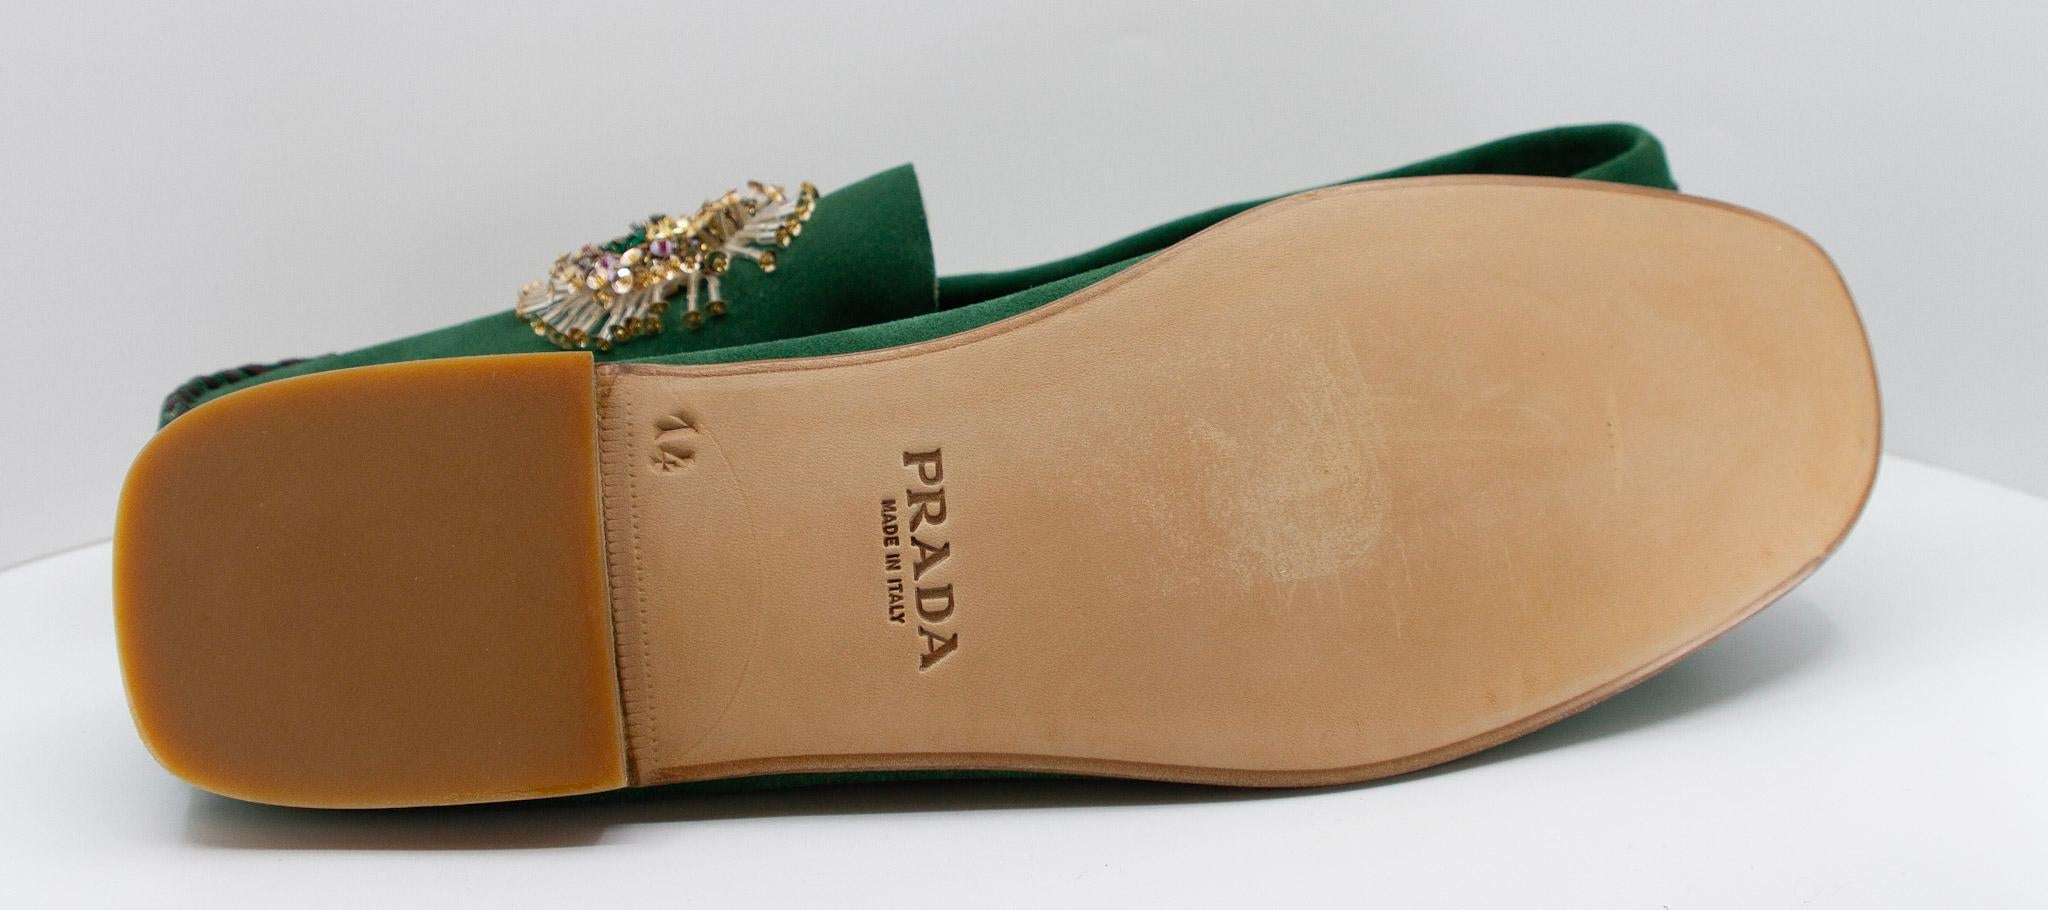 Prada, Green, Suede, Loafers with Beaded Embellishments and Leather Soles For Sale 1